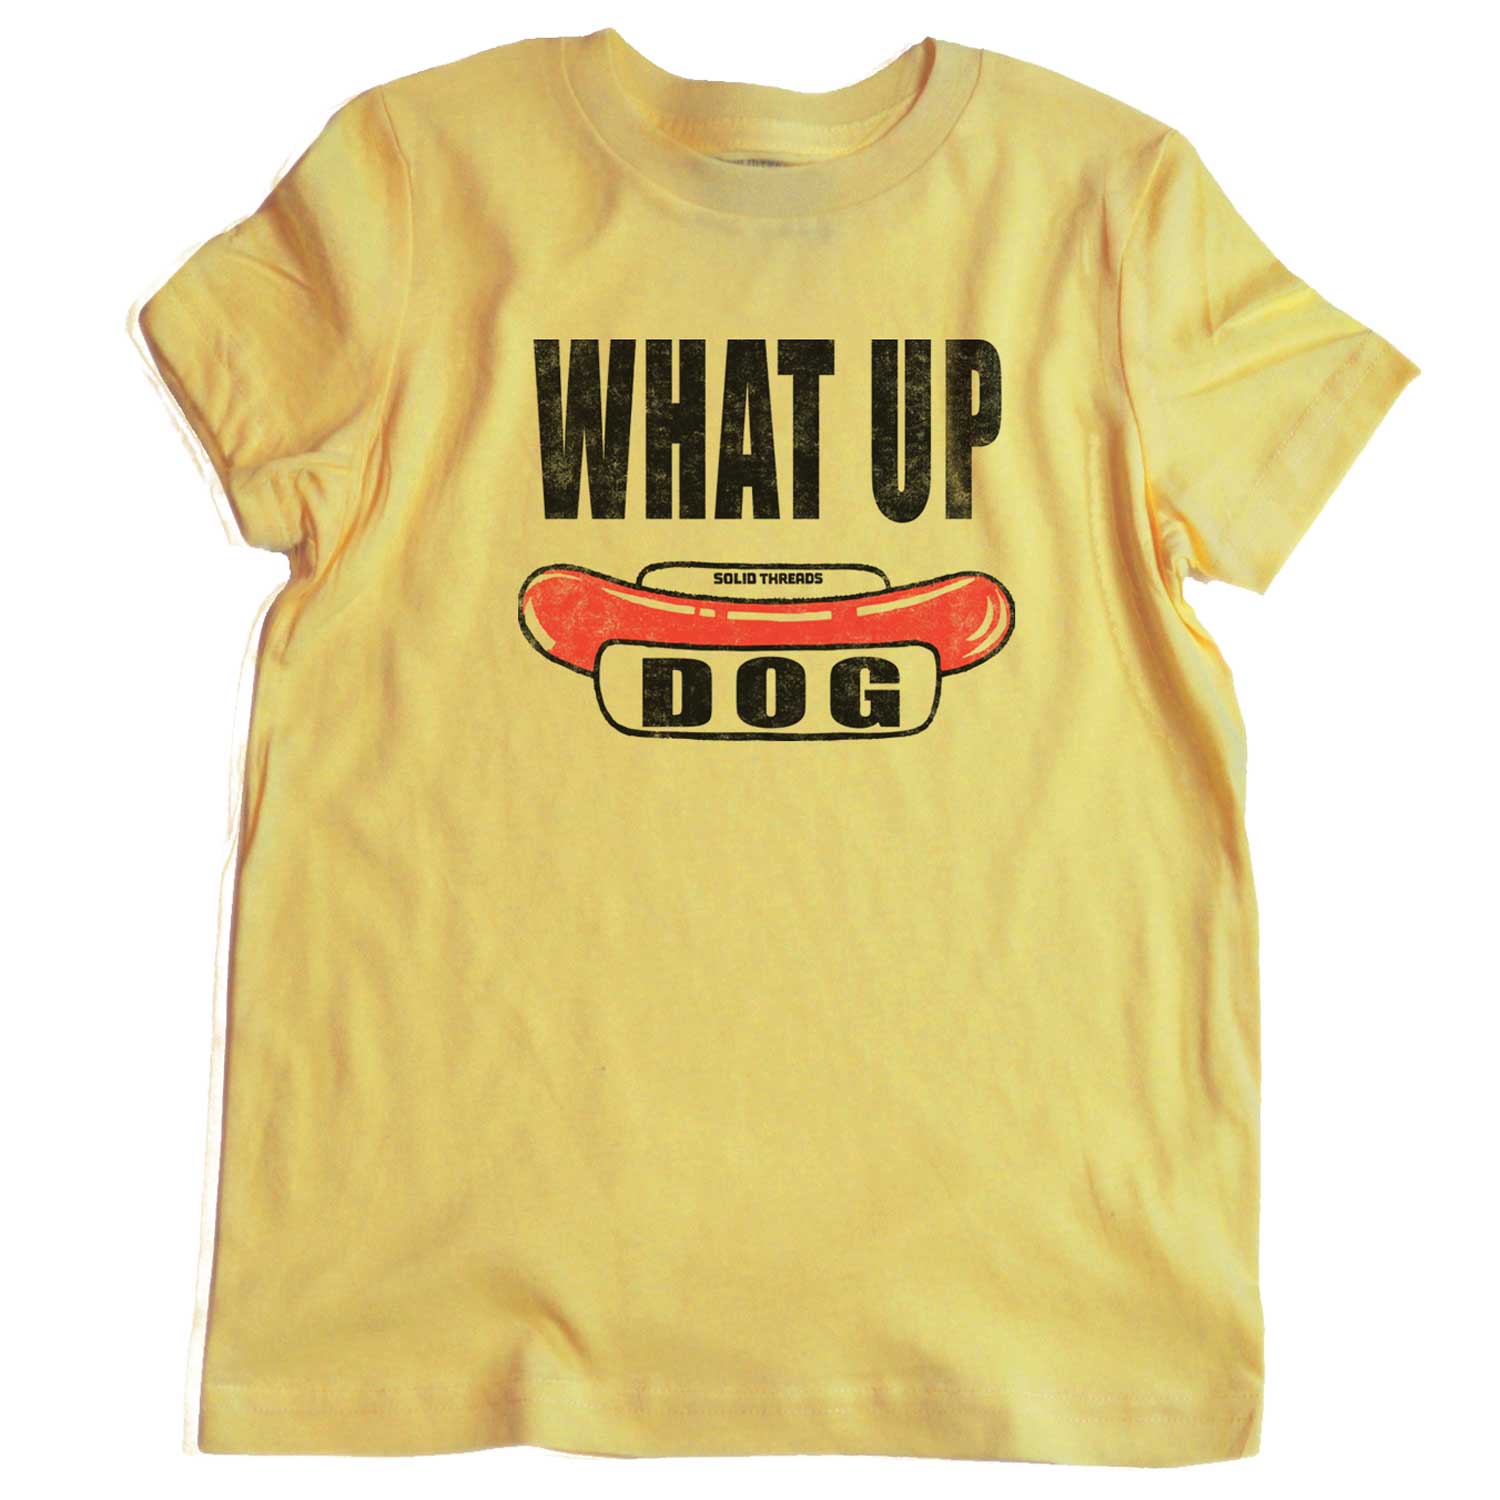 Hot Dog Johnny's Yellow Adult T-shirt